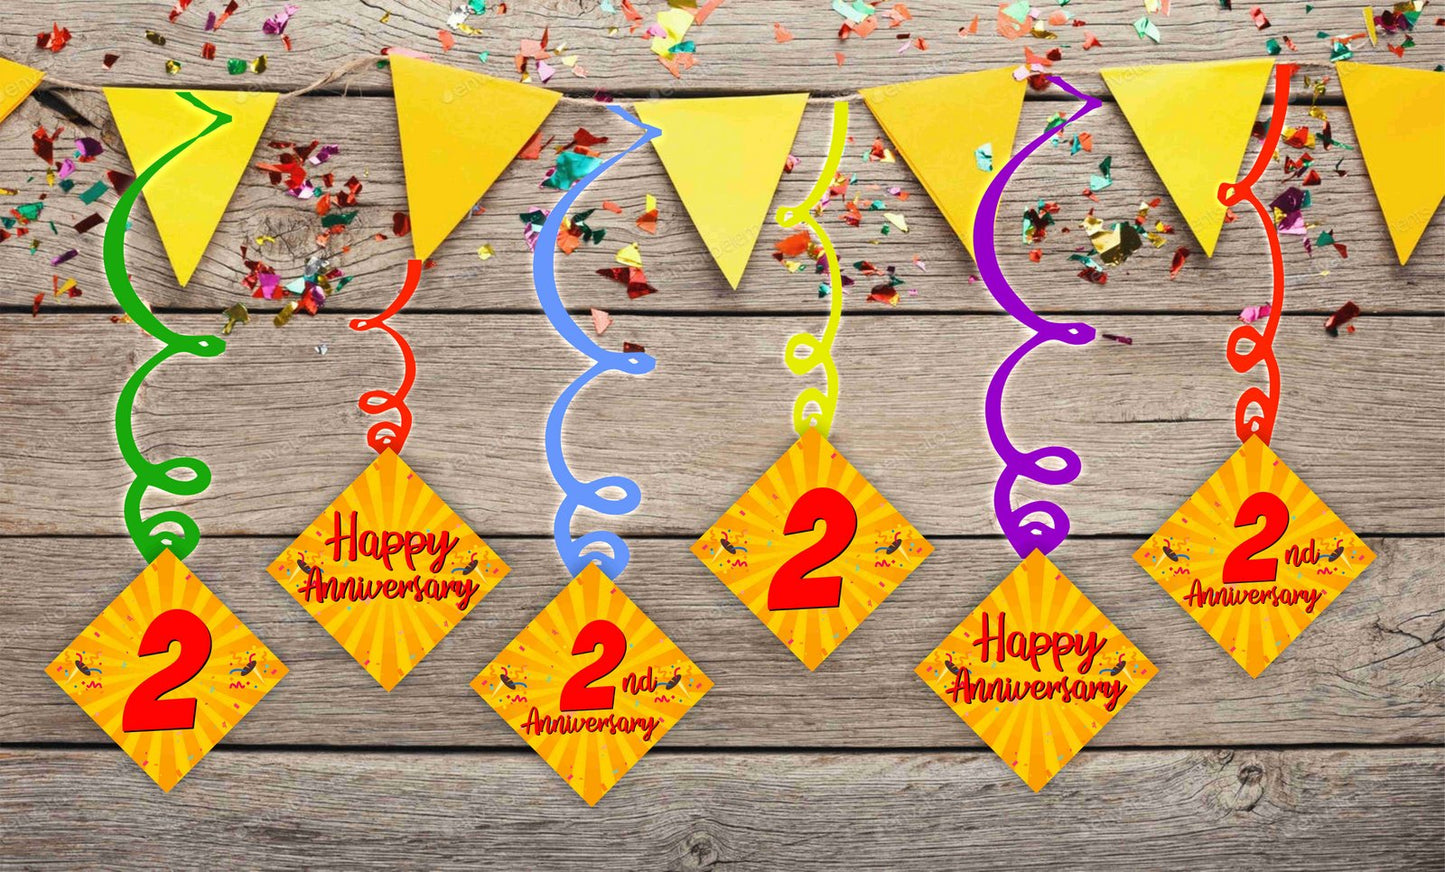 2nd Anniversary Ceiling Hanging Swirls Decorations Cutout Festive Party Supplies (Pack of 6 swirls and cutout)